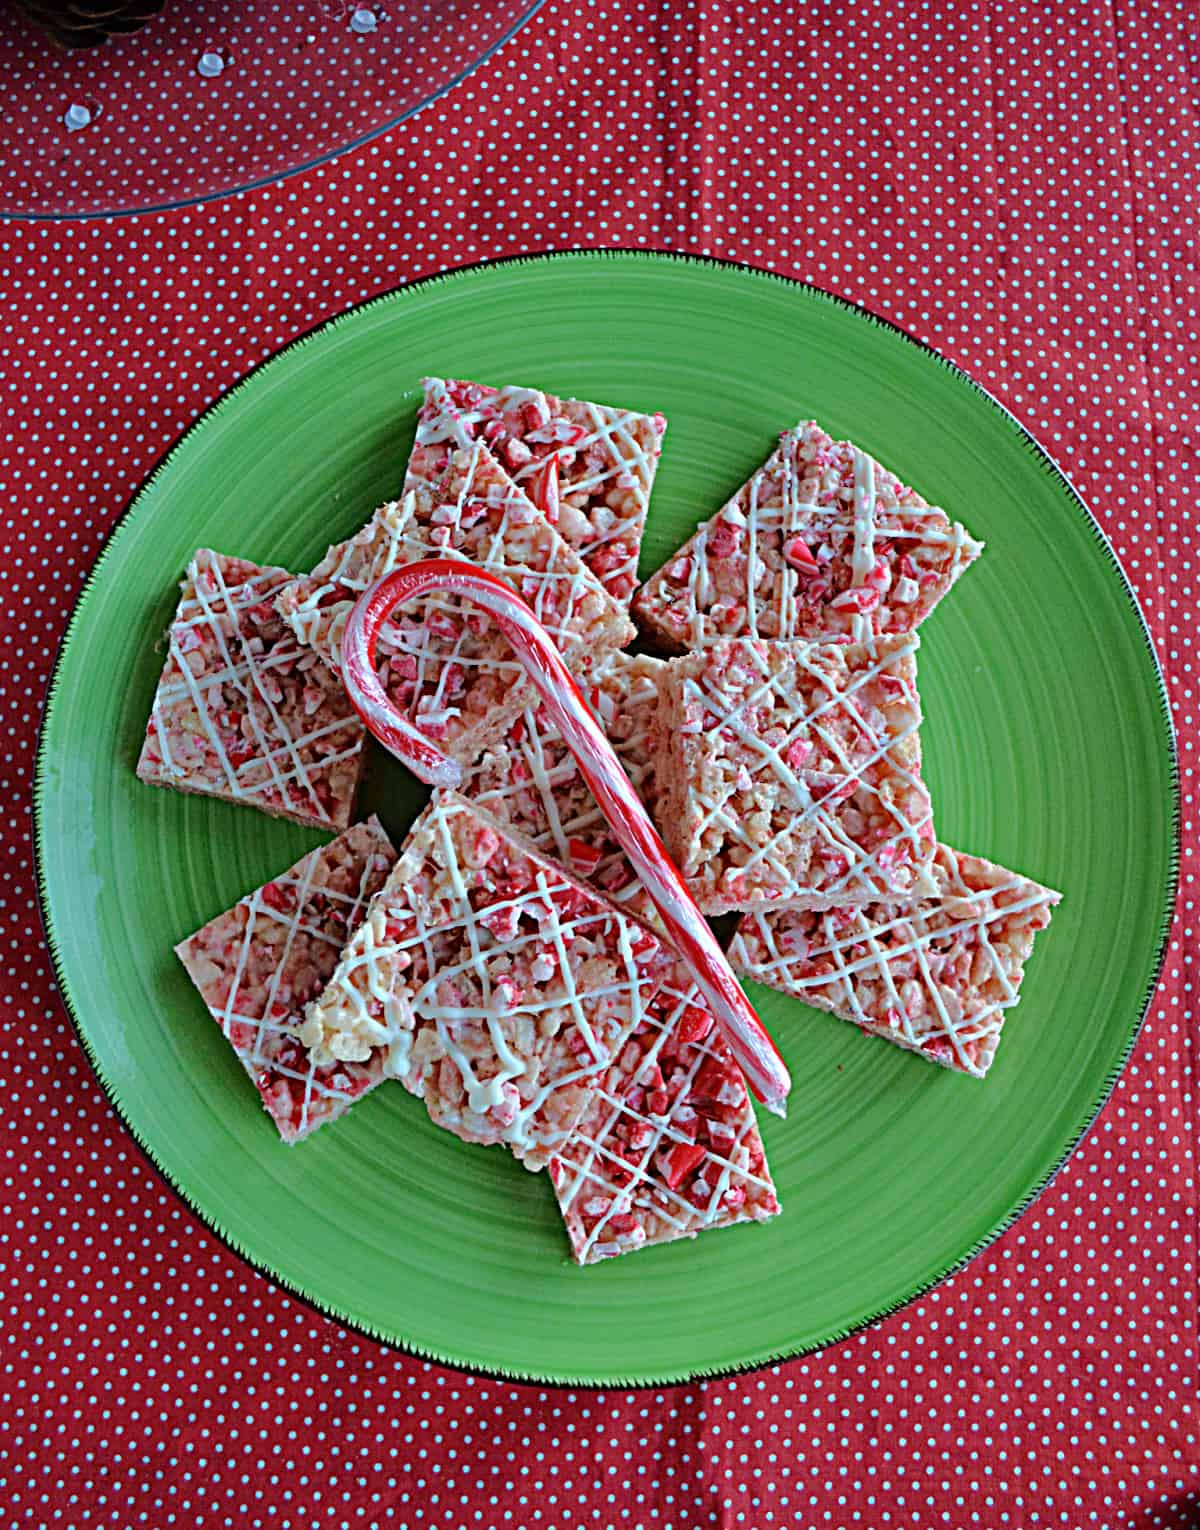 Candy Cane Rice Krispies Treats - Hezzi-D's Books and Cooks